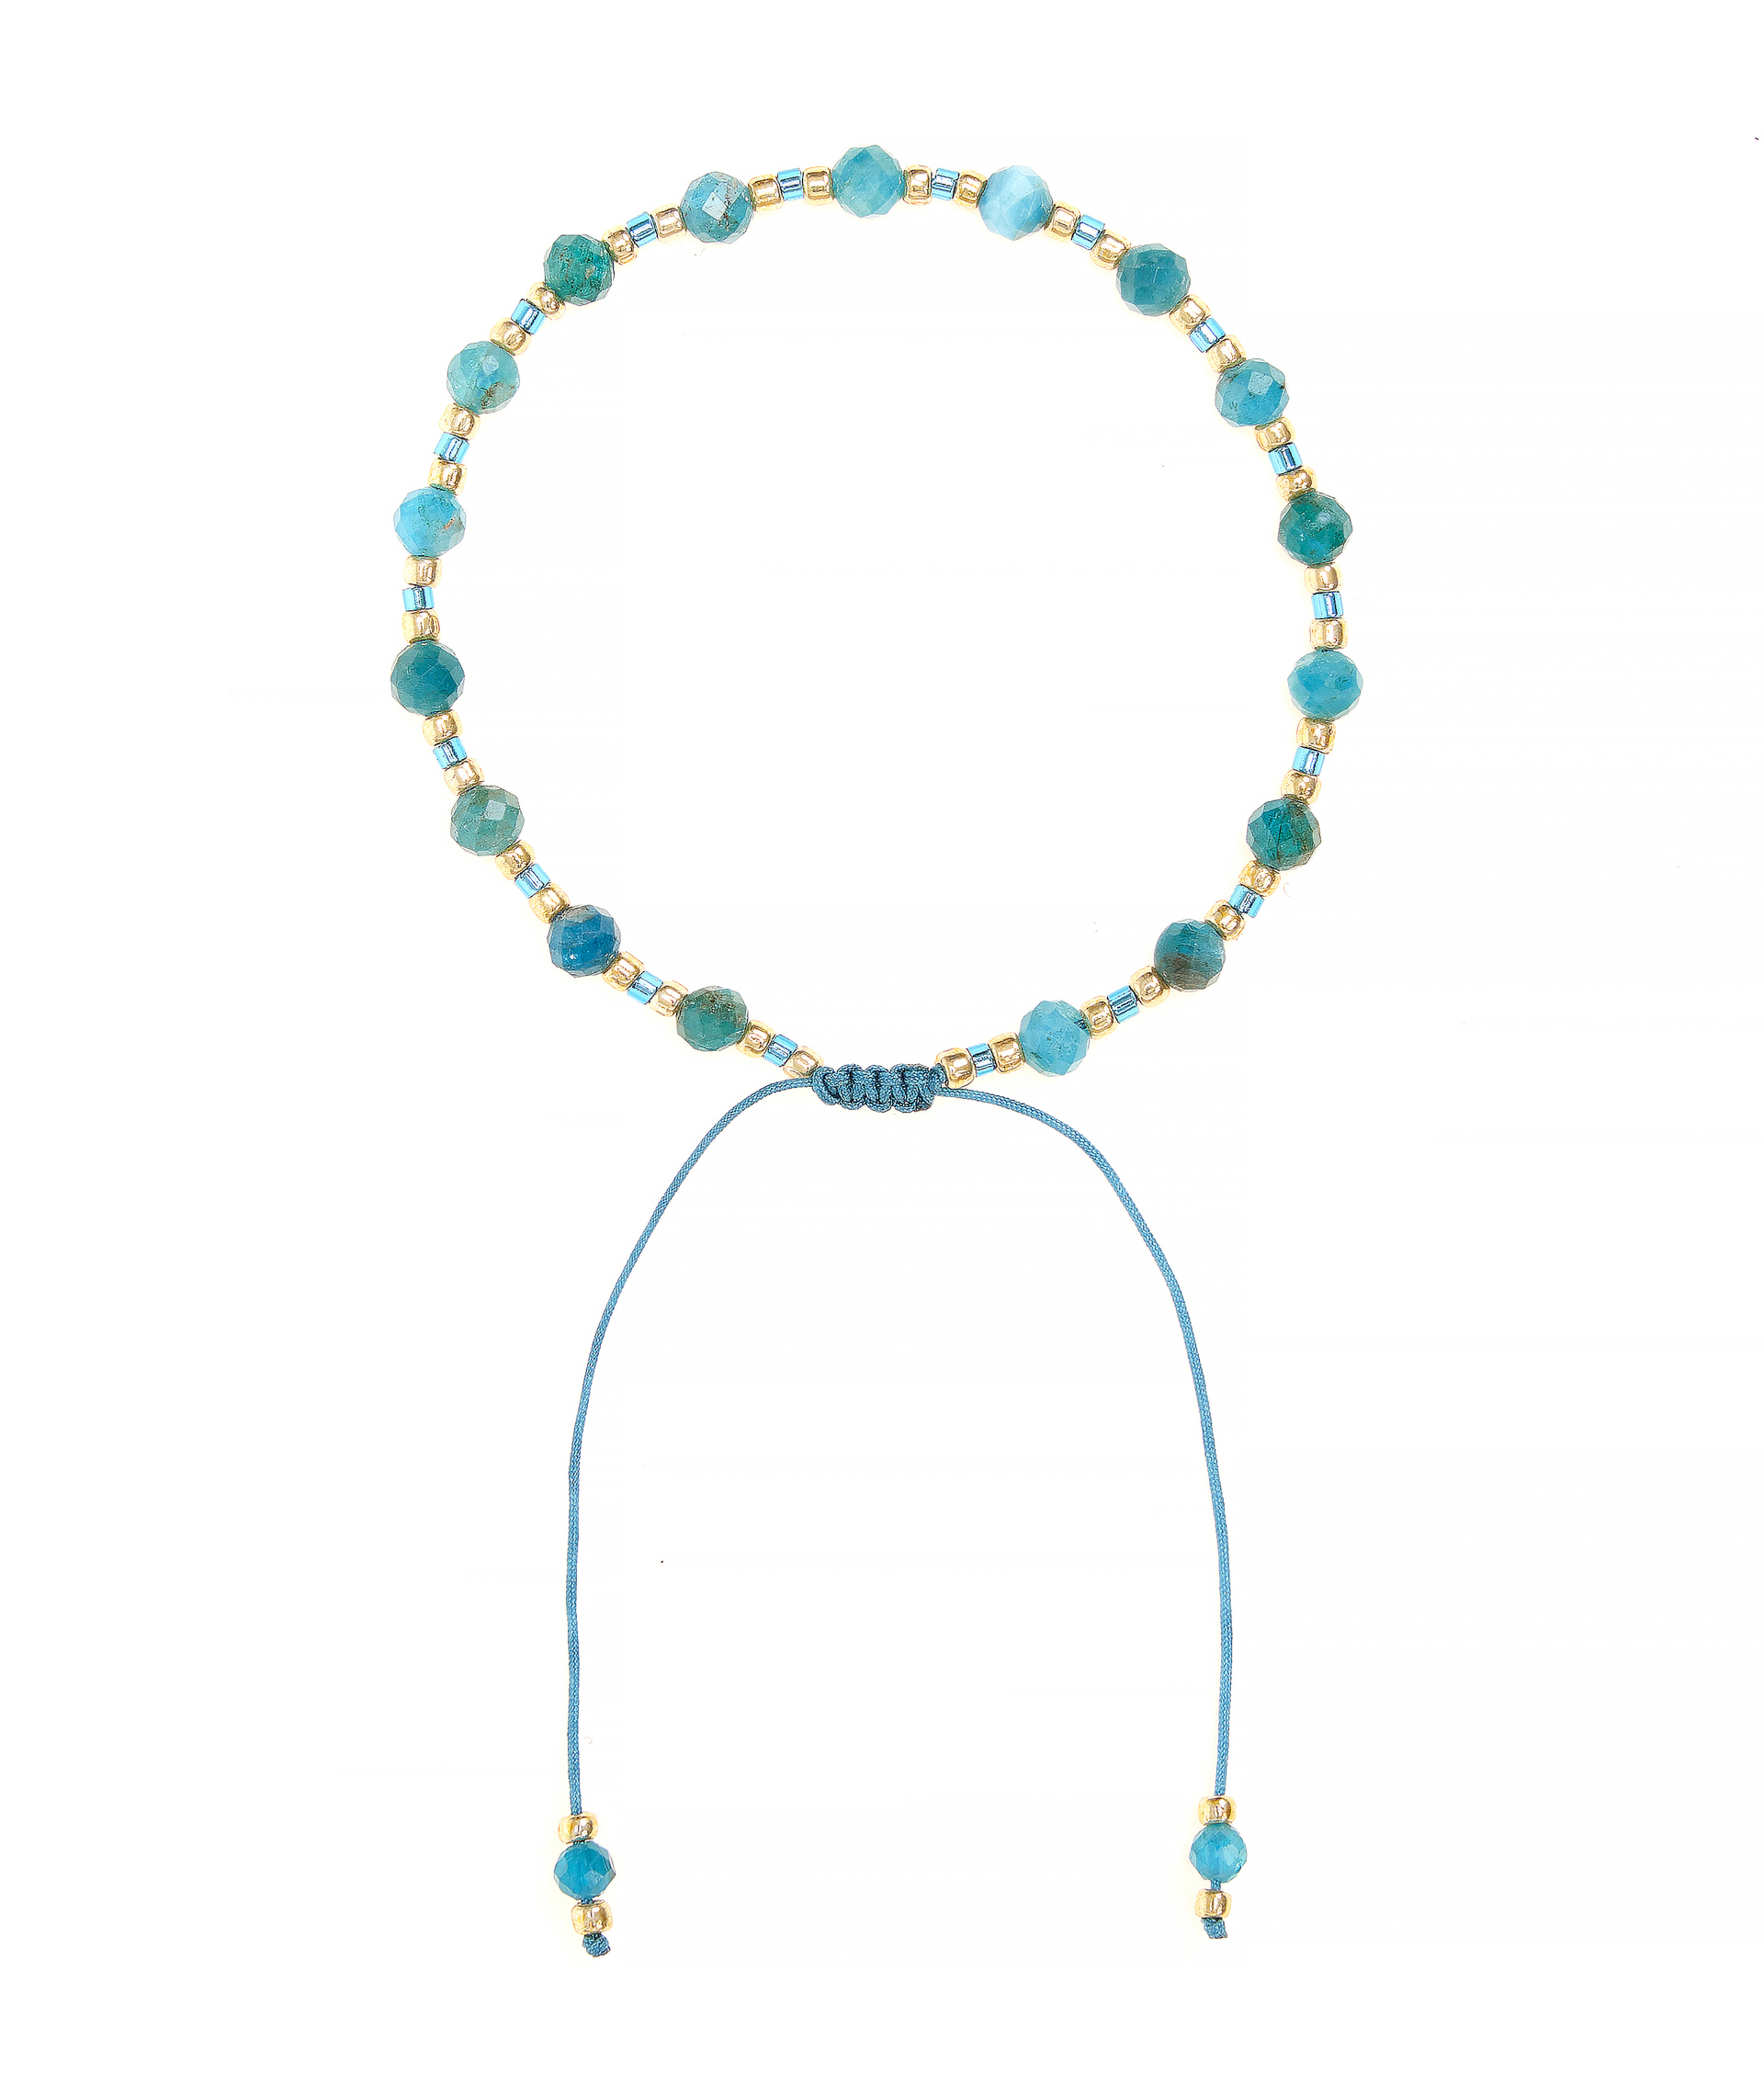 Turquoise Stones Bracelet by TFD